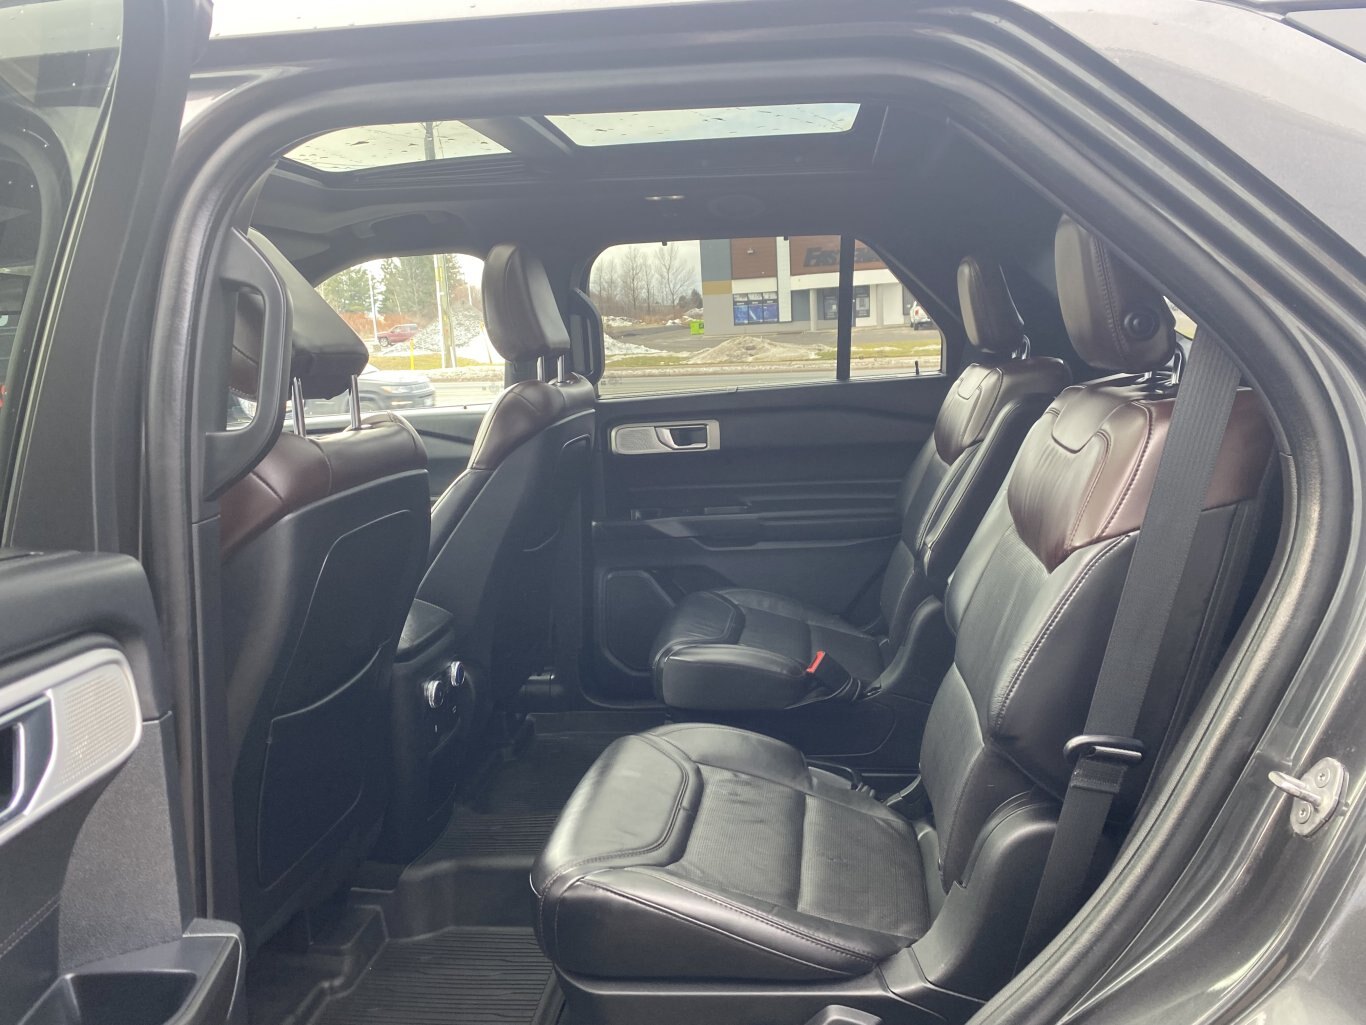 2020 FORD EXPLORER PLATINUM ECOBOOST 4WD 3RD ROW SEATING WITH SUNROOF, LEATHER SEATS, HEATED SEATS, HEATED STEERING WHEEL, REAR VIEW CAMERA, POWER TRUNK, NAVIGATION AND REMOTE START!!